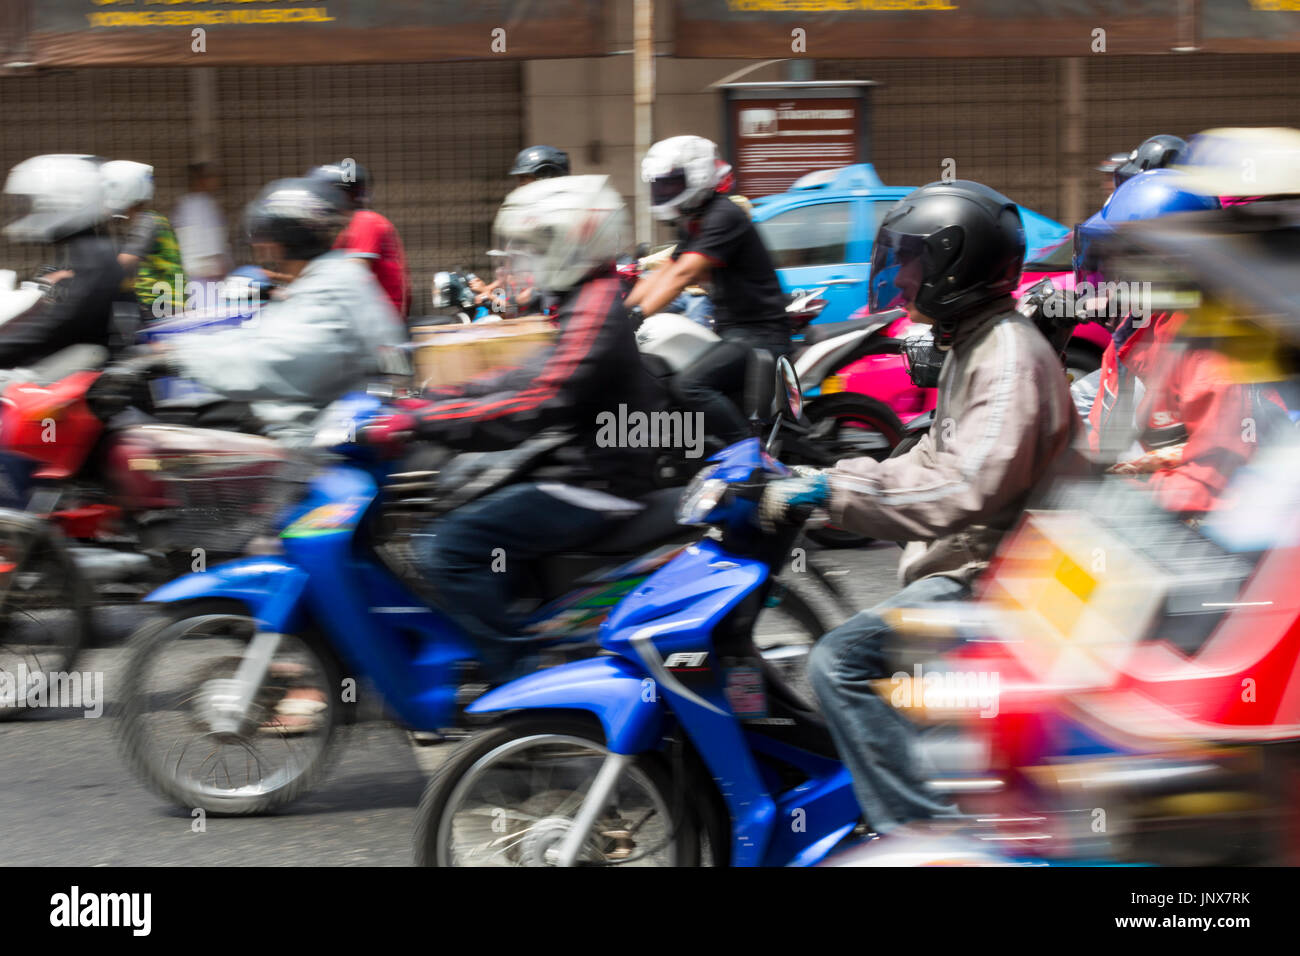 Bangkok, Thailand - February 18, 2015: Line of motorcycles moving off from a traffic light in Bangkok. Motorcycles are a very common mode of transport in Bangkok. Stock Photo